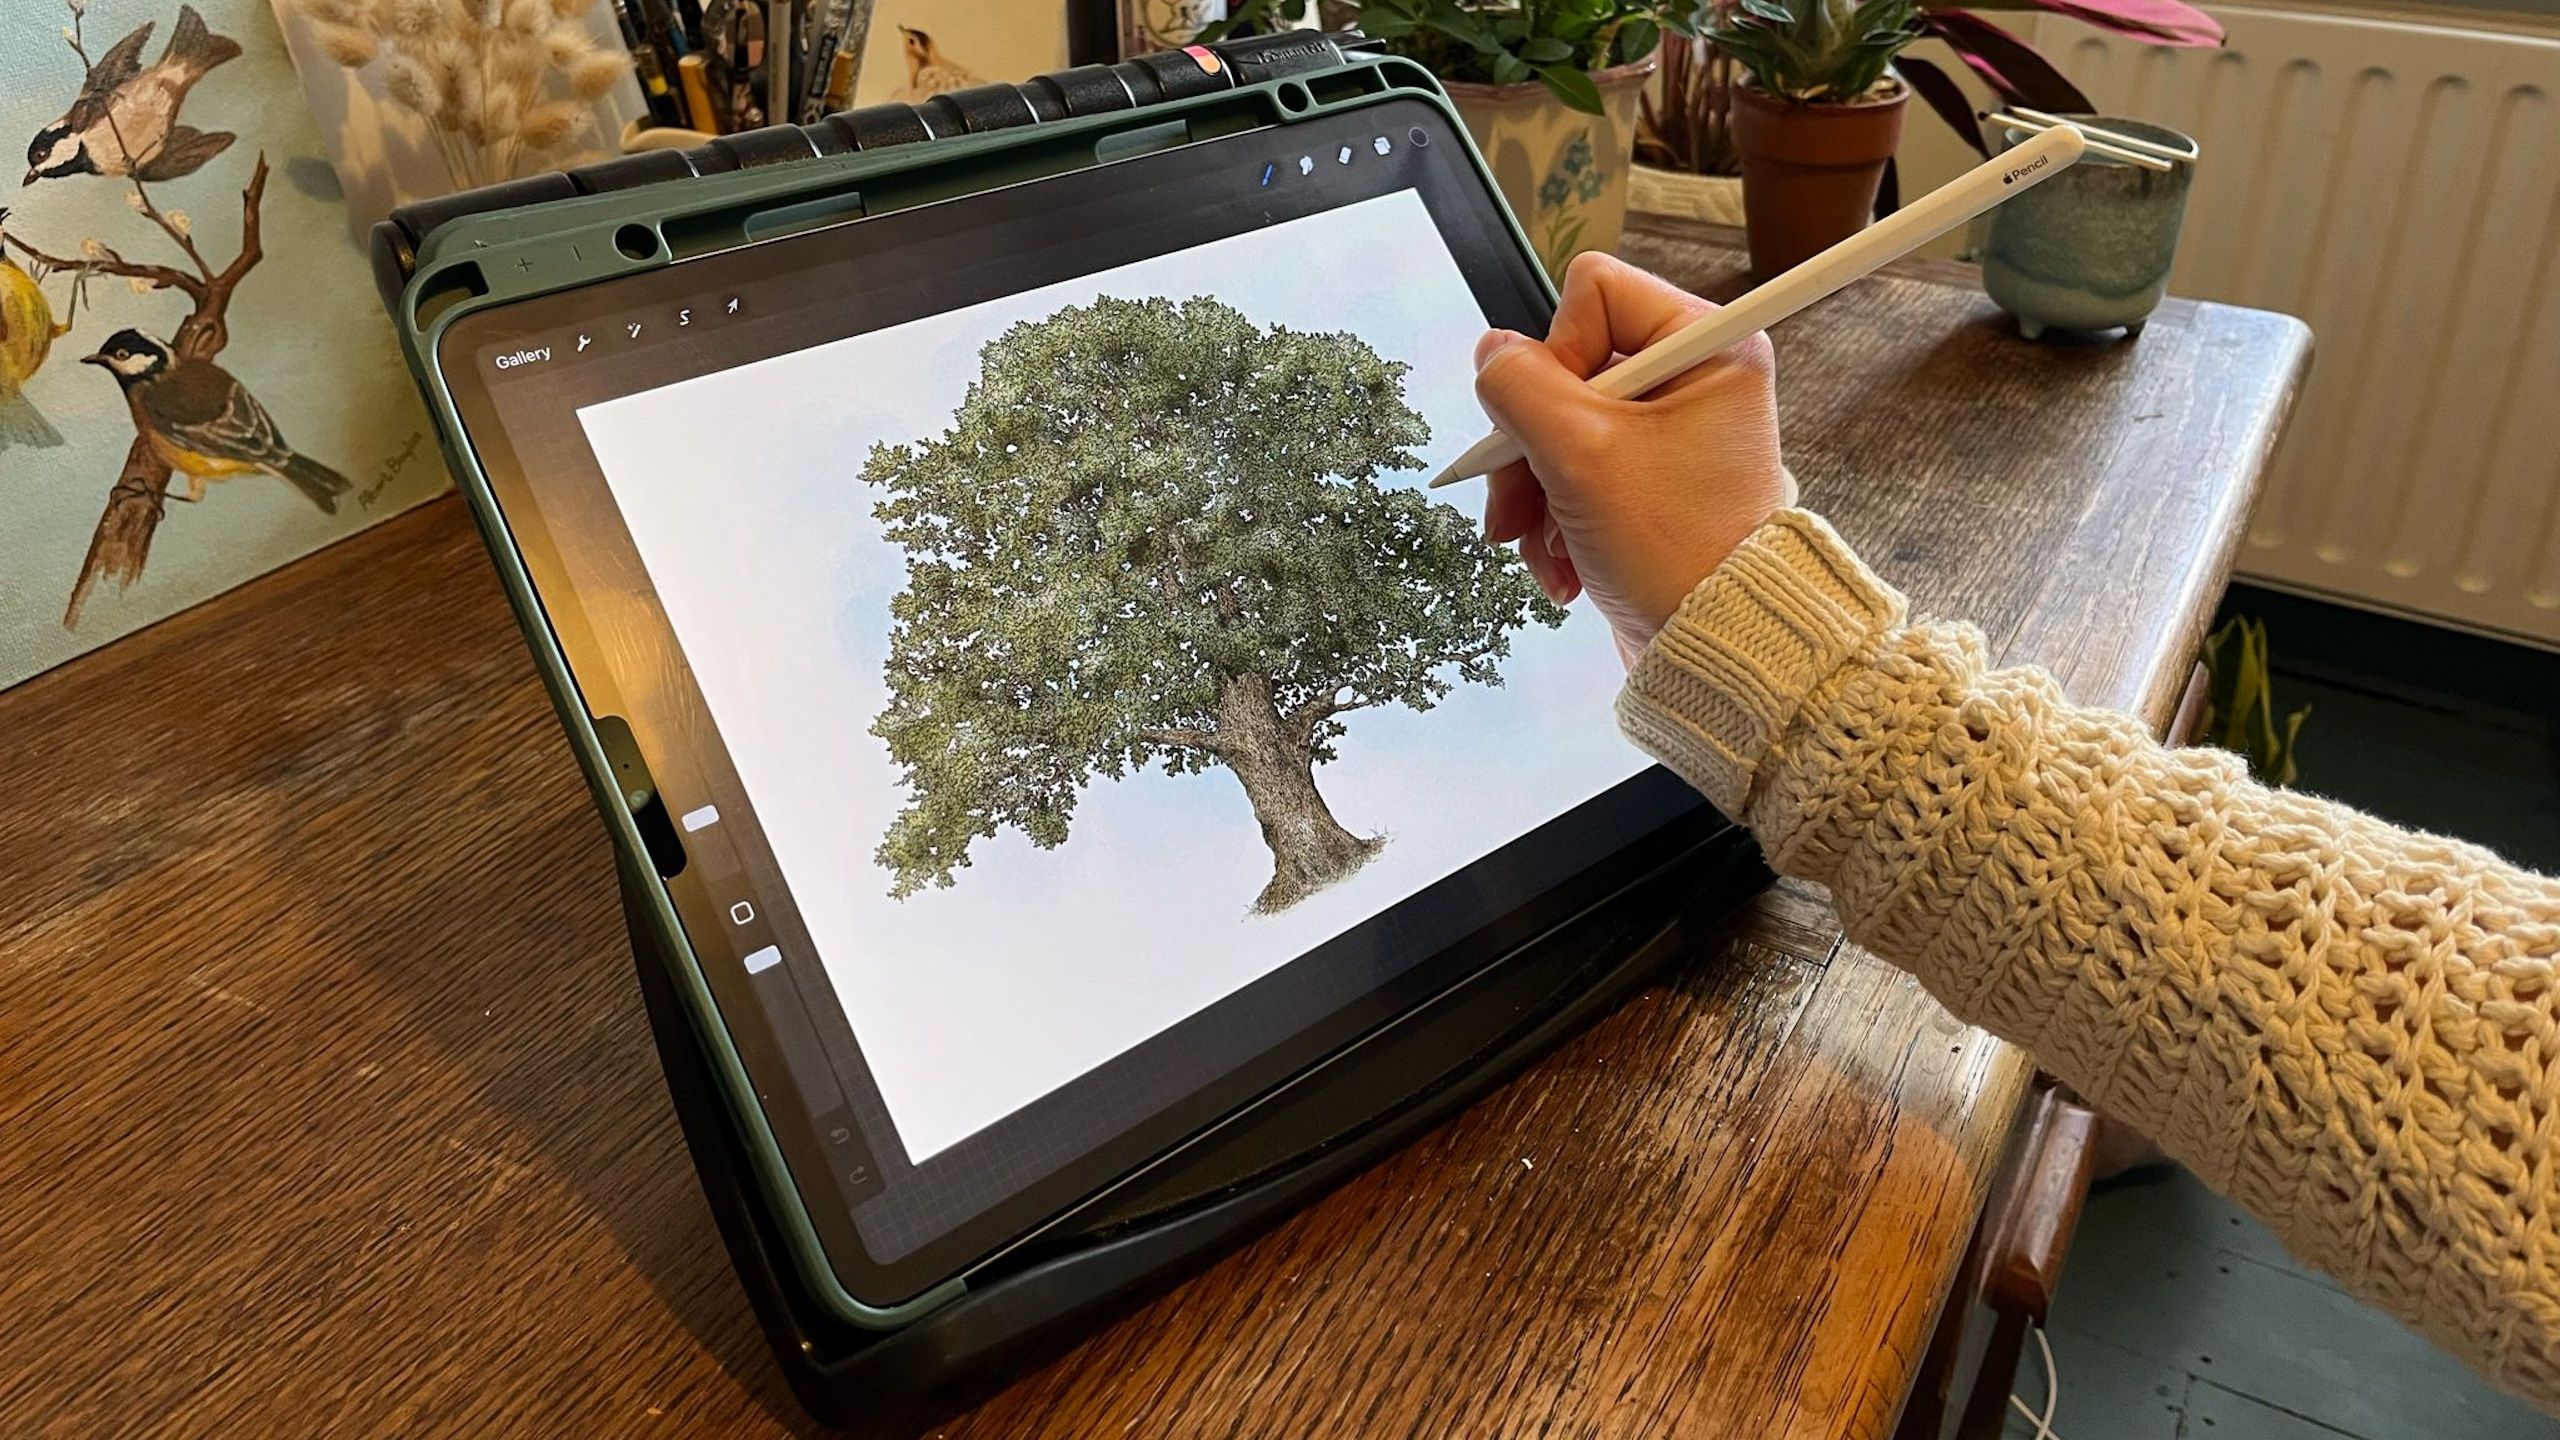 How this professional illustrator uses an iPad to create luxury art